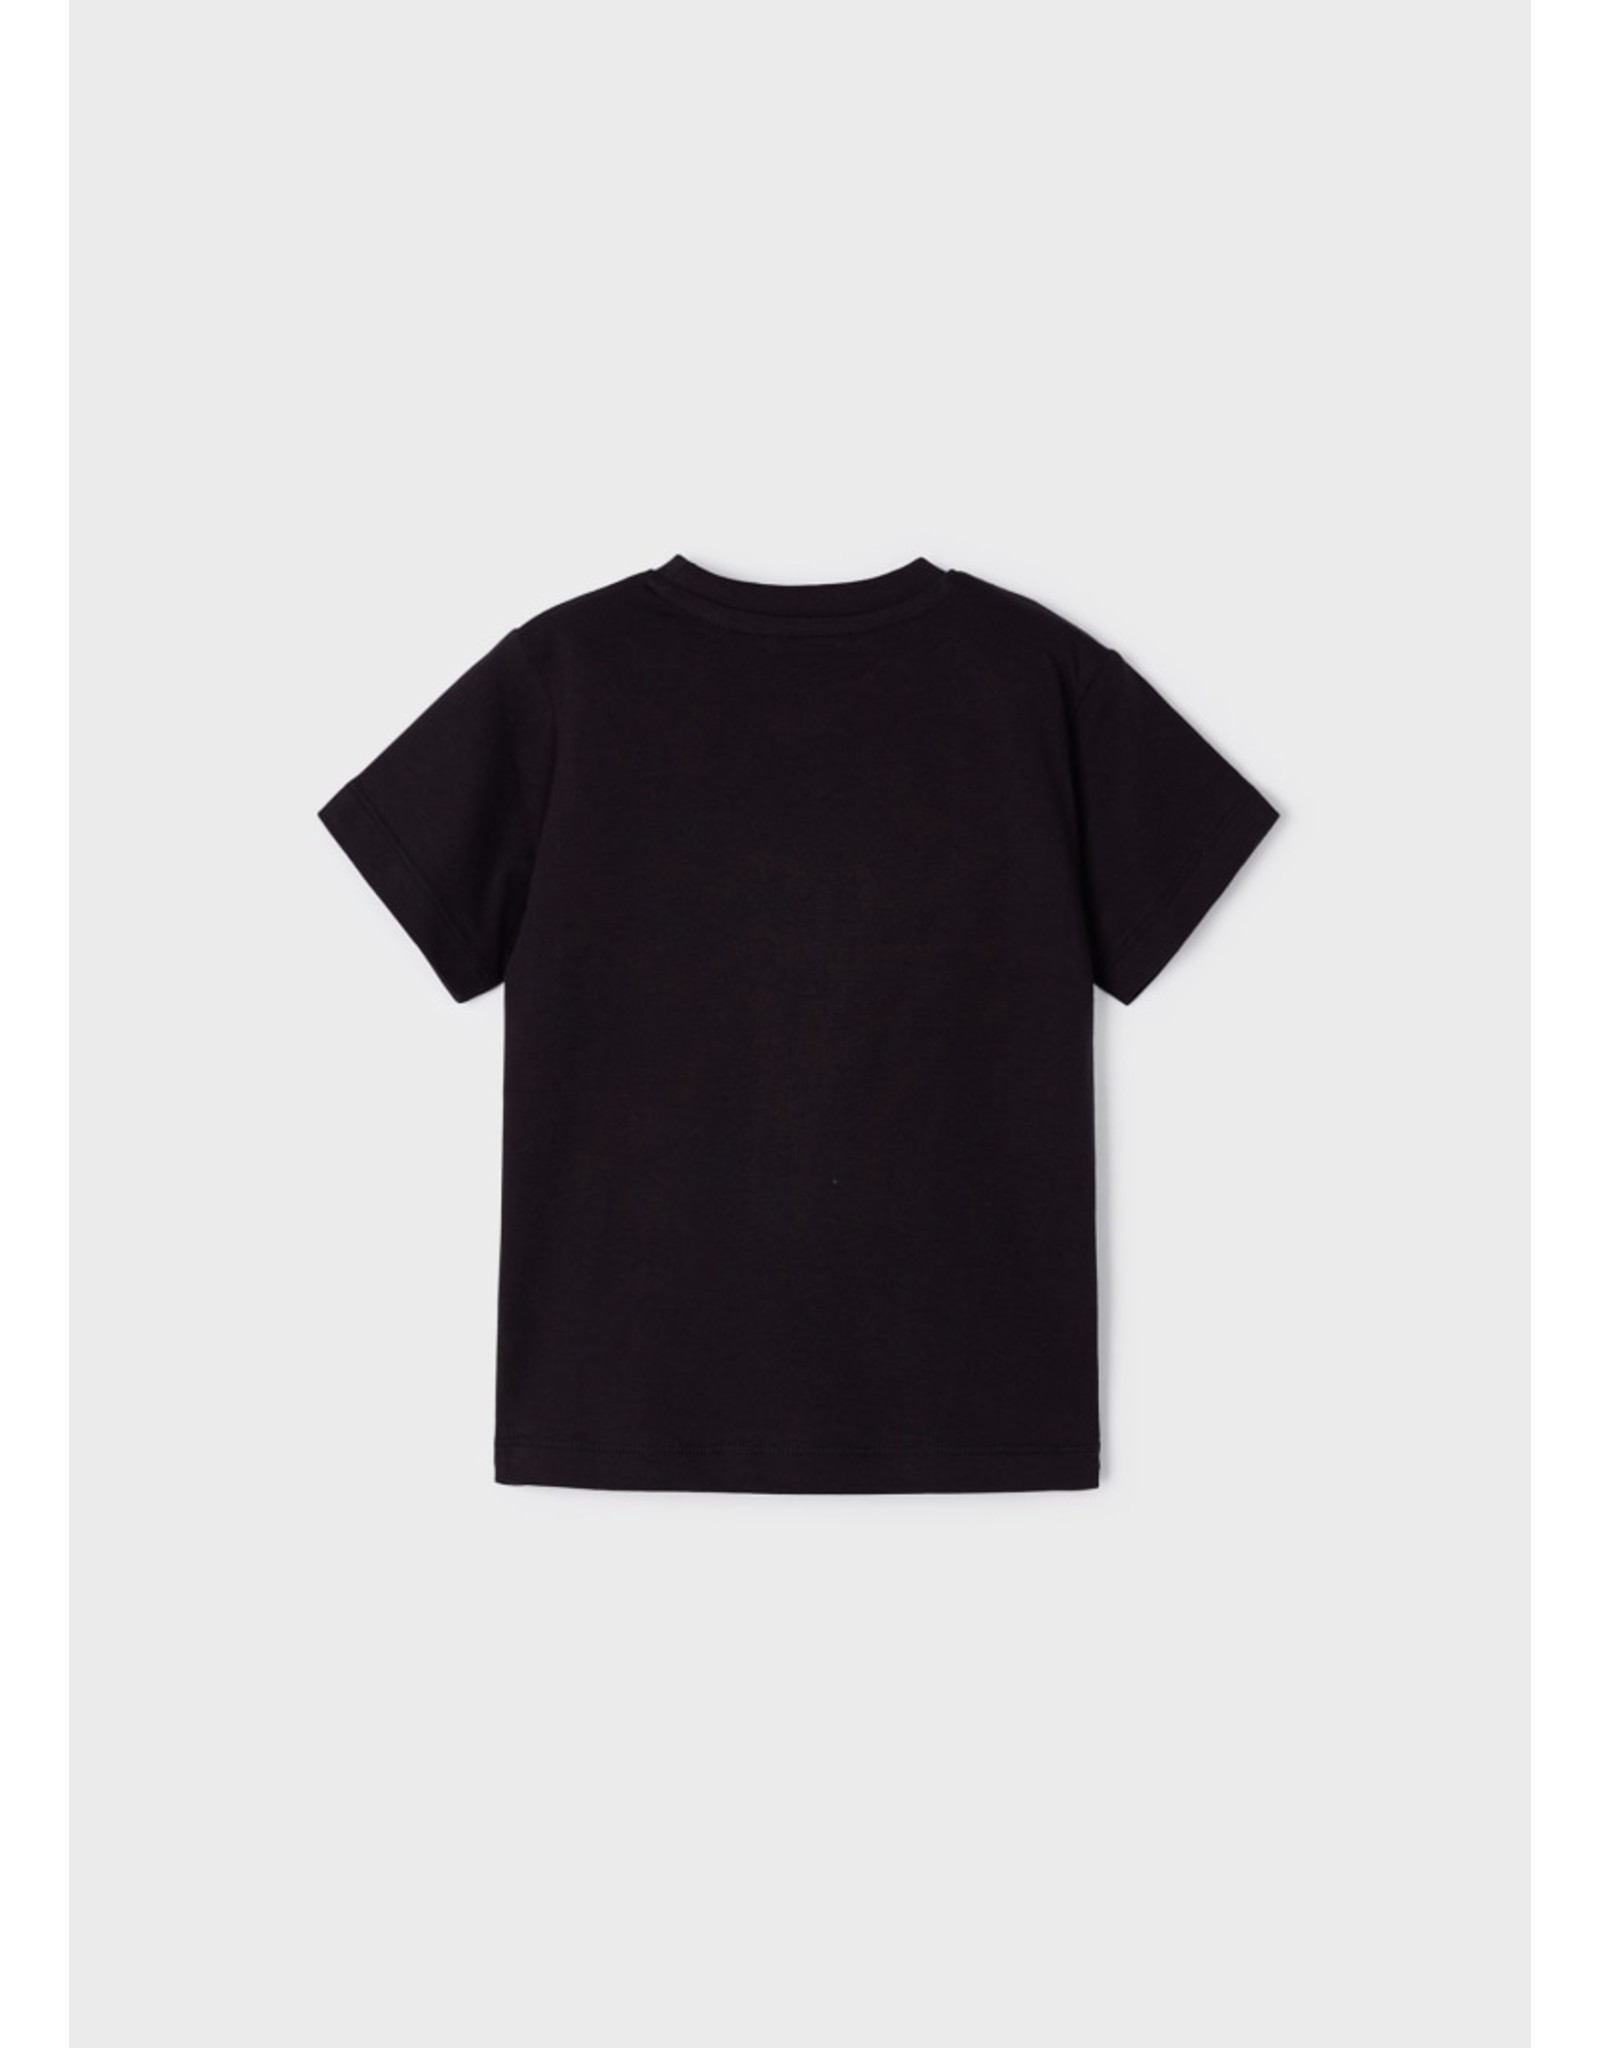 Mayoral S/s t-shirt  Black  SS23-3020-33